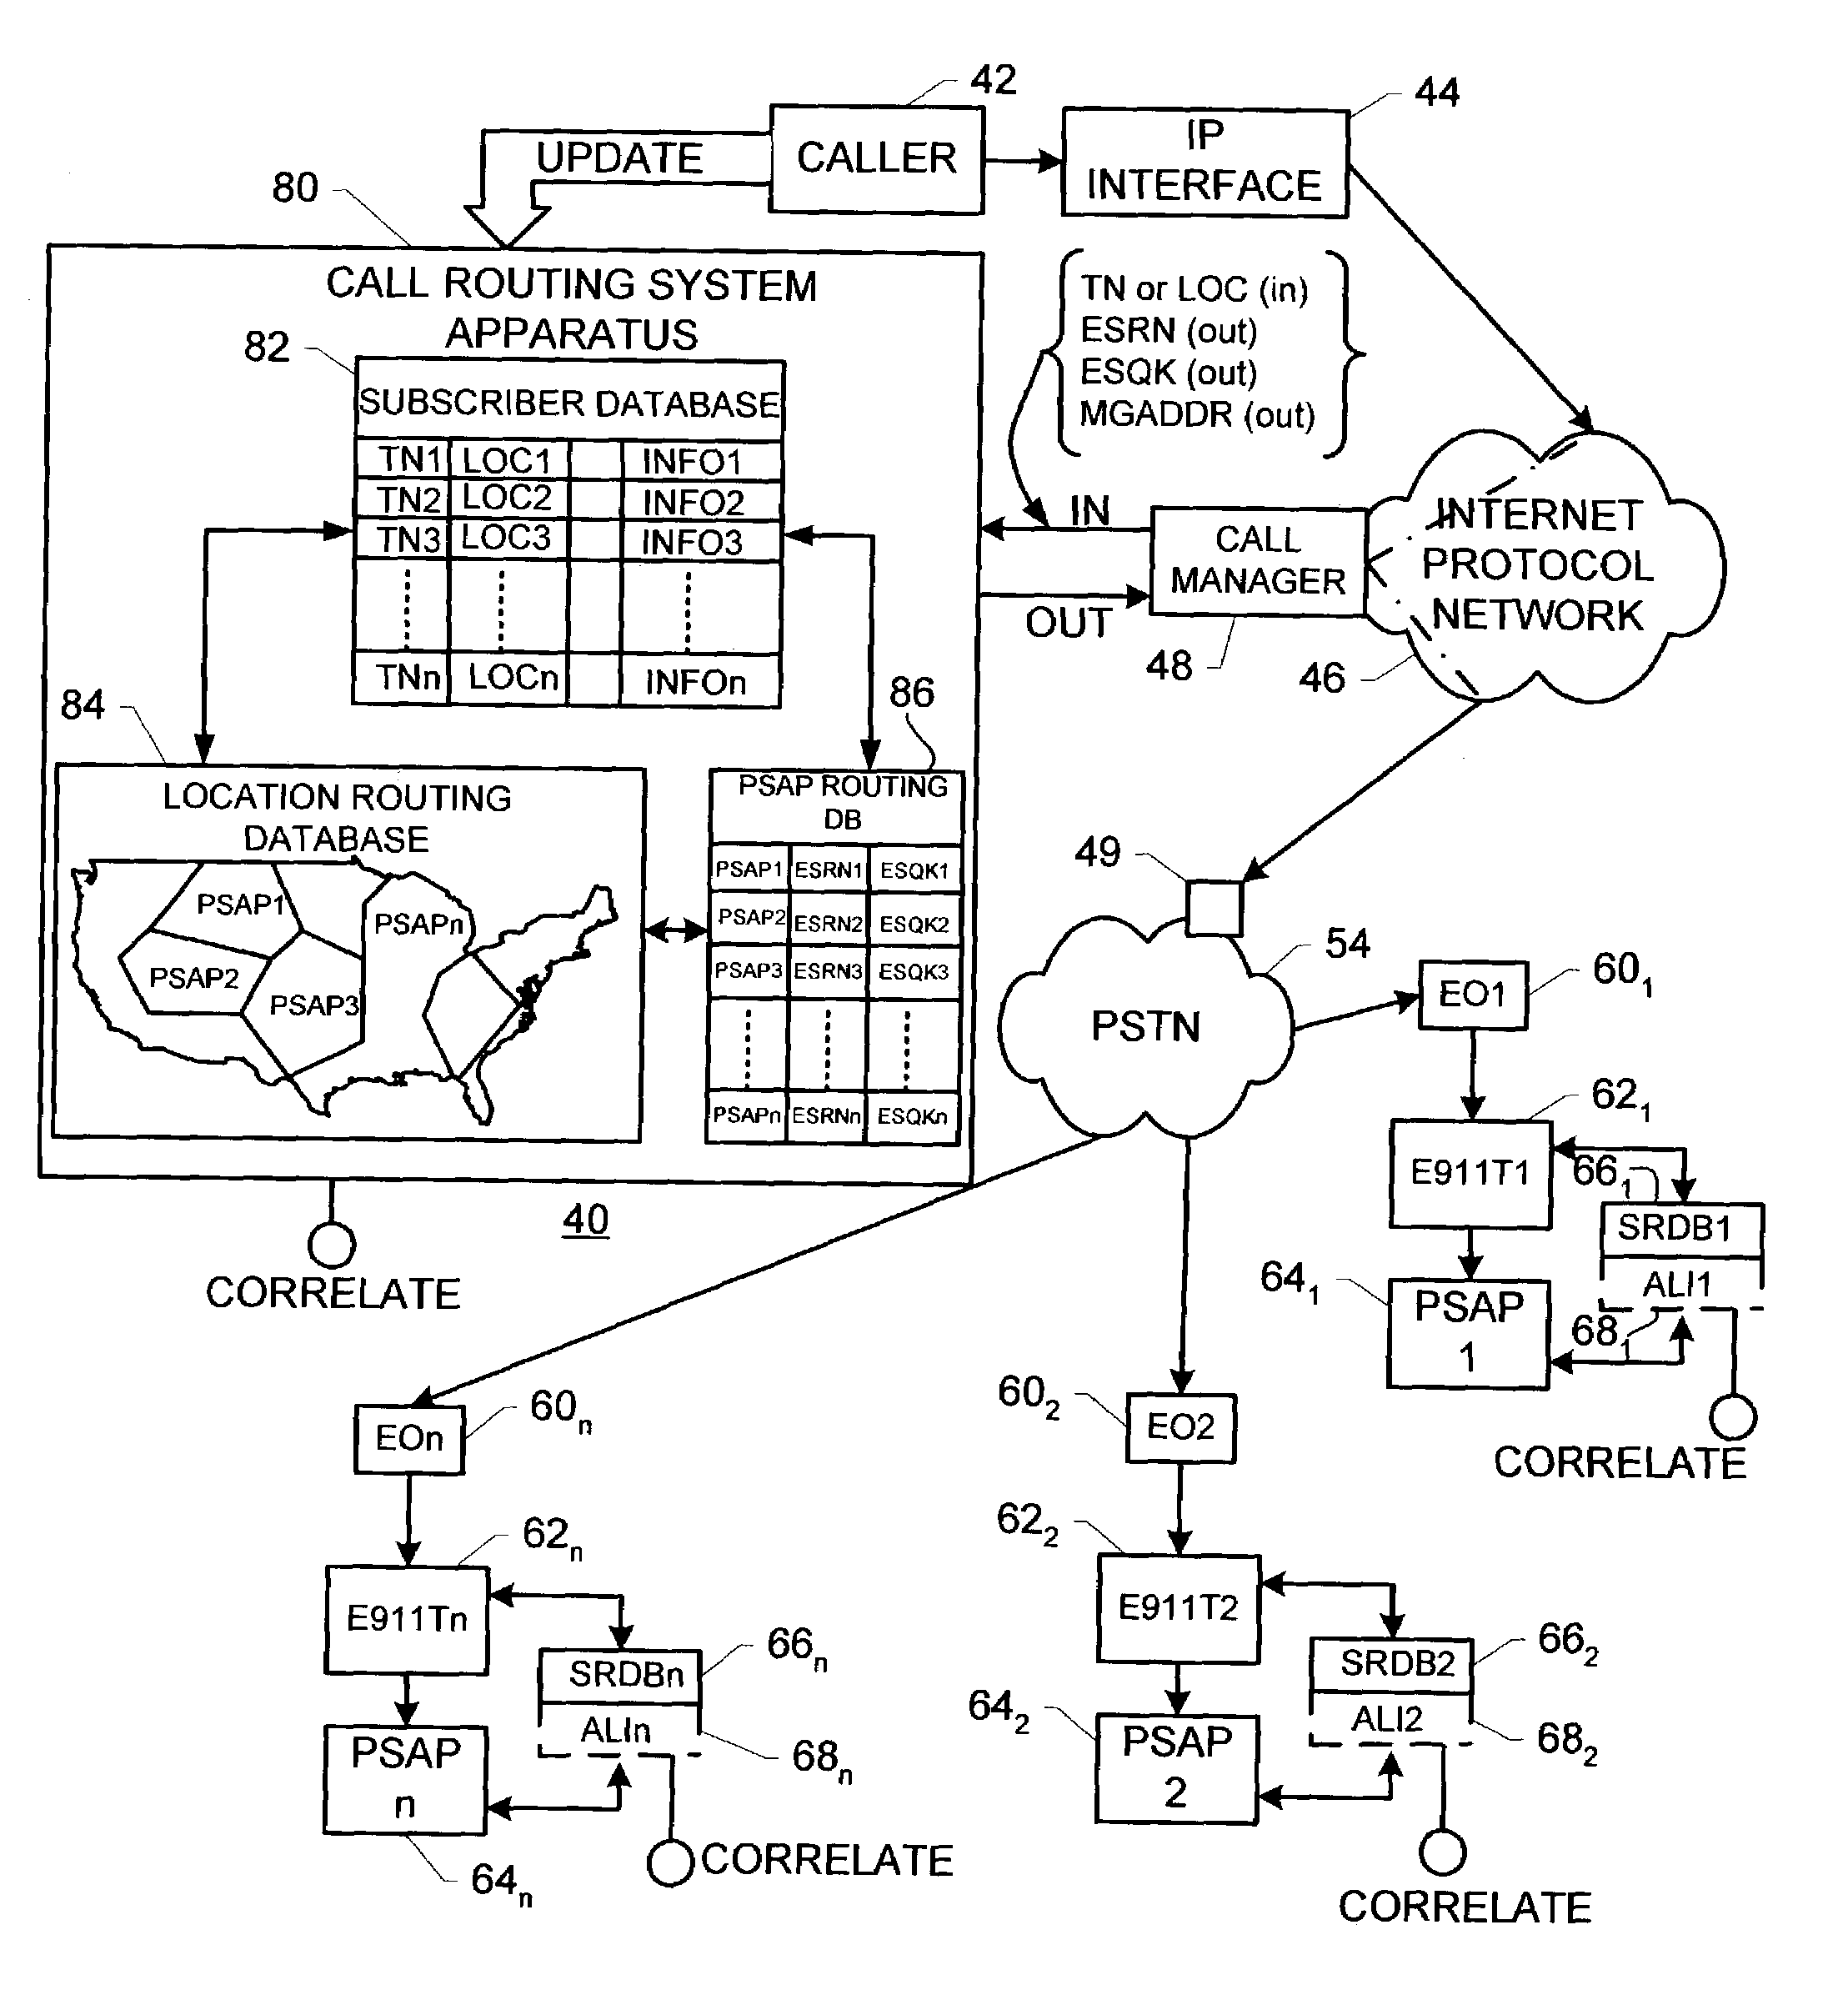 System and method for routing telephone calls involving internet protocol network